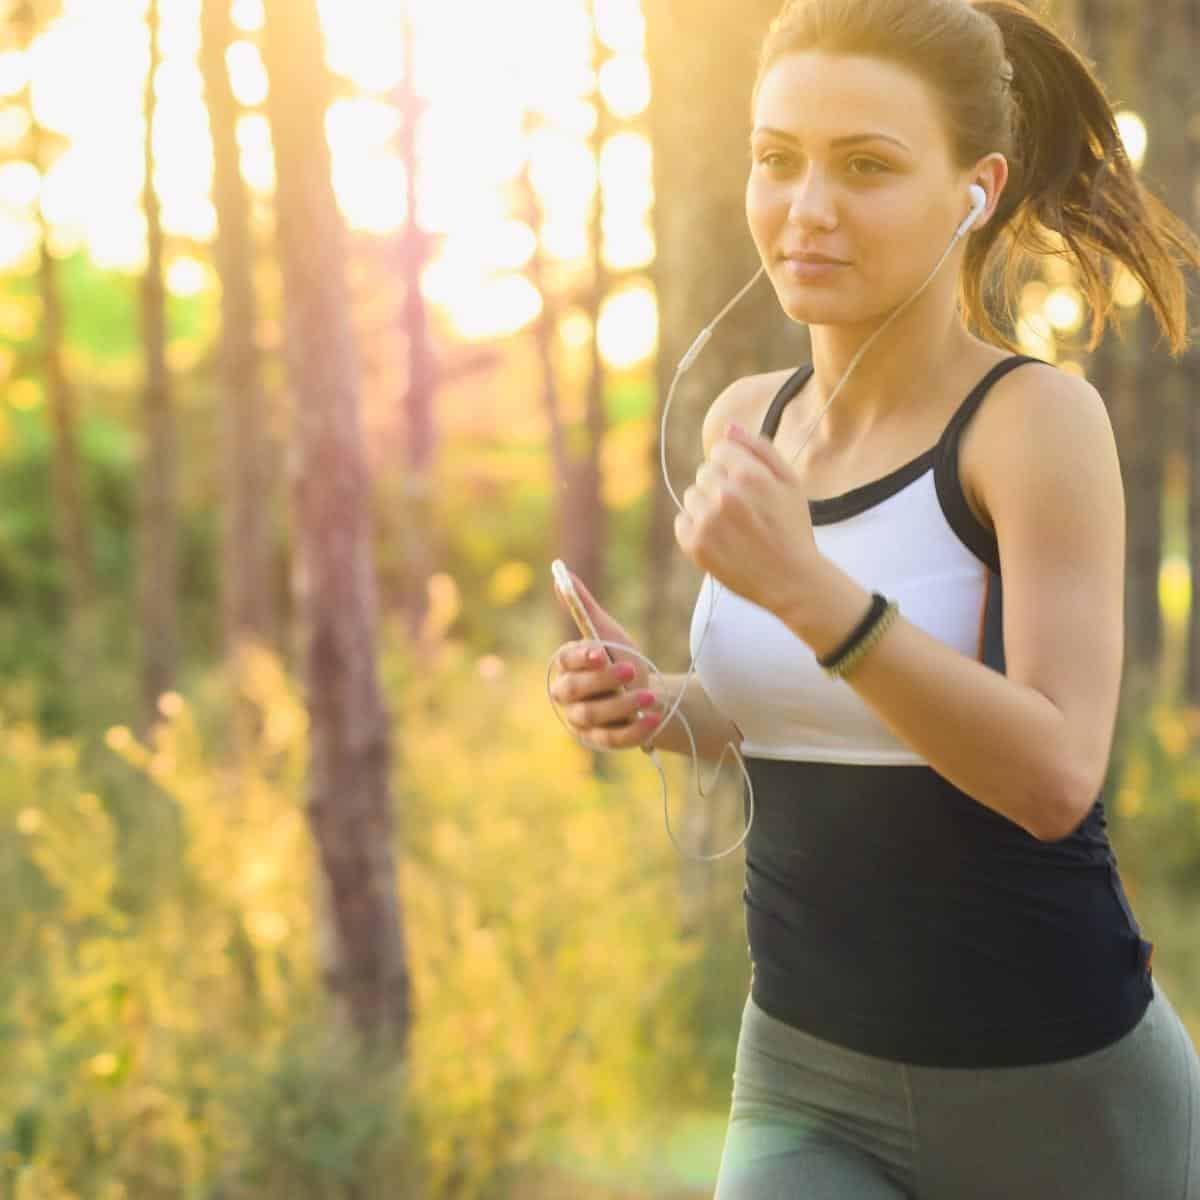 The best running workouts for weight loss